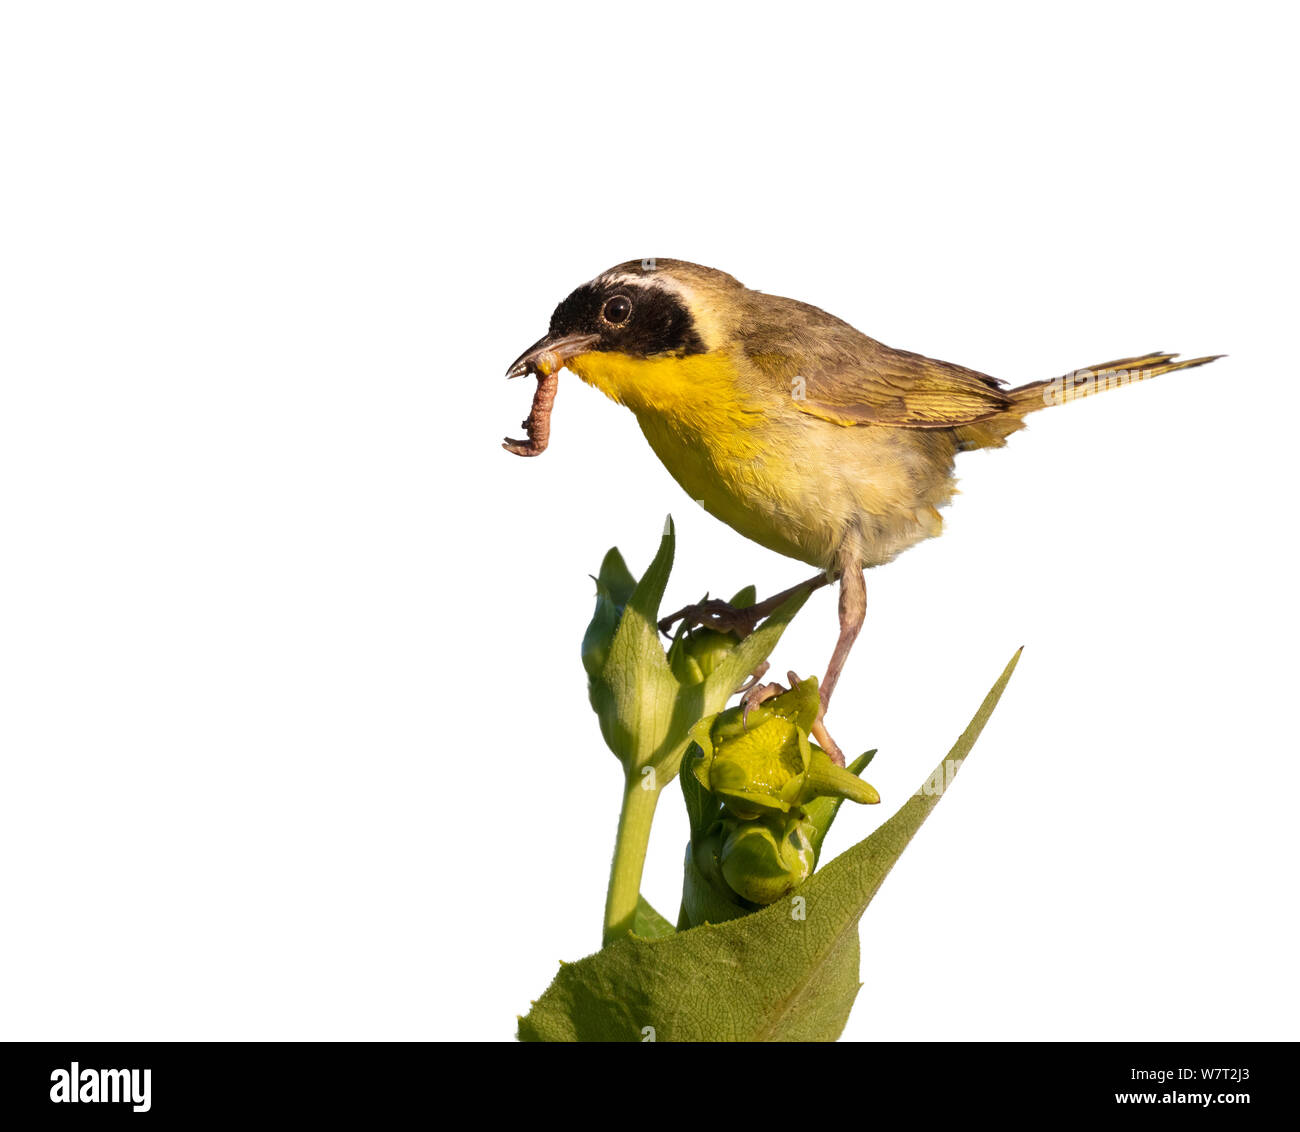 Common yellowthroat (Geothlypis trichas) male with insect in the beak, isolated on white background. Stock Photo